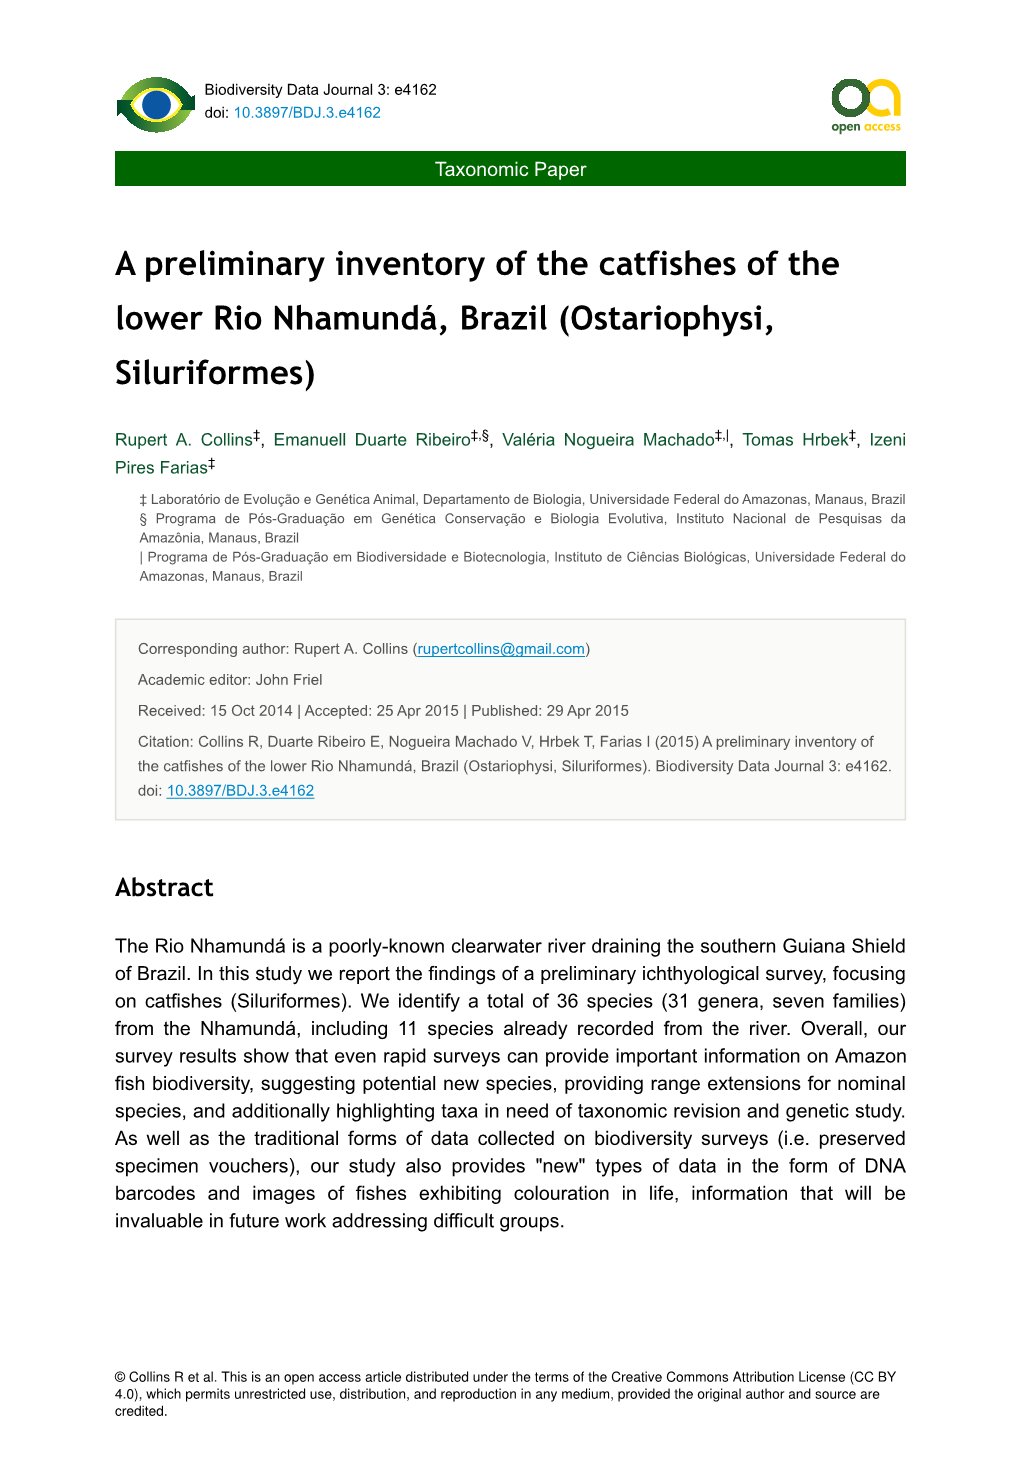 A Preliminary Inventory of the Catfishes of the Lower Rio Nhamundá, Brazil (Ostariophysi, Siluriformes)